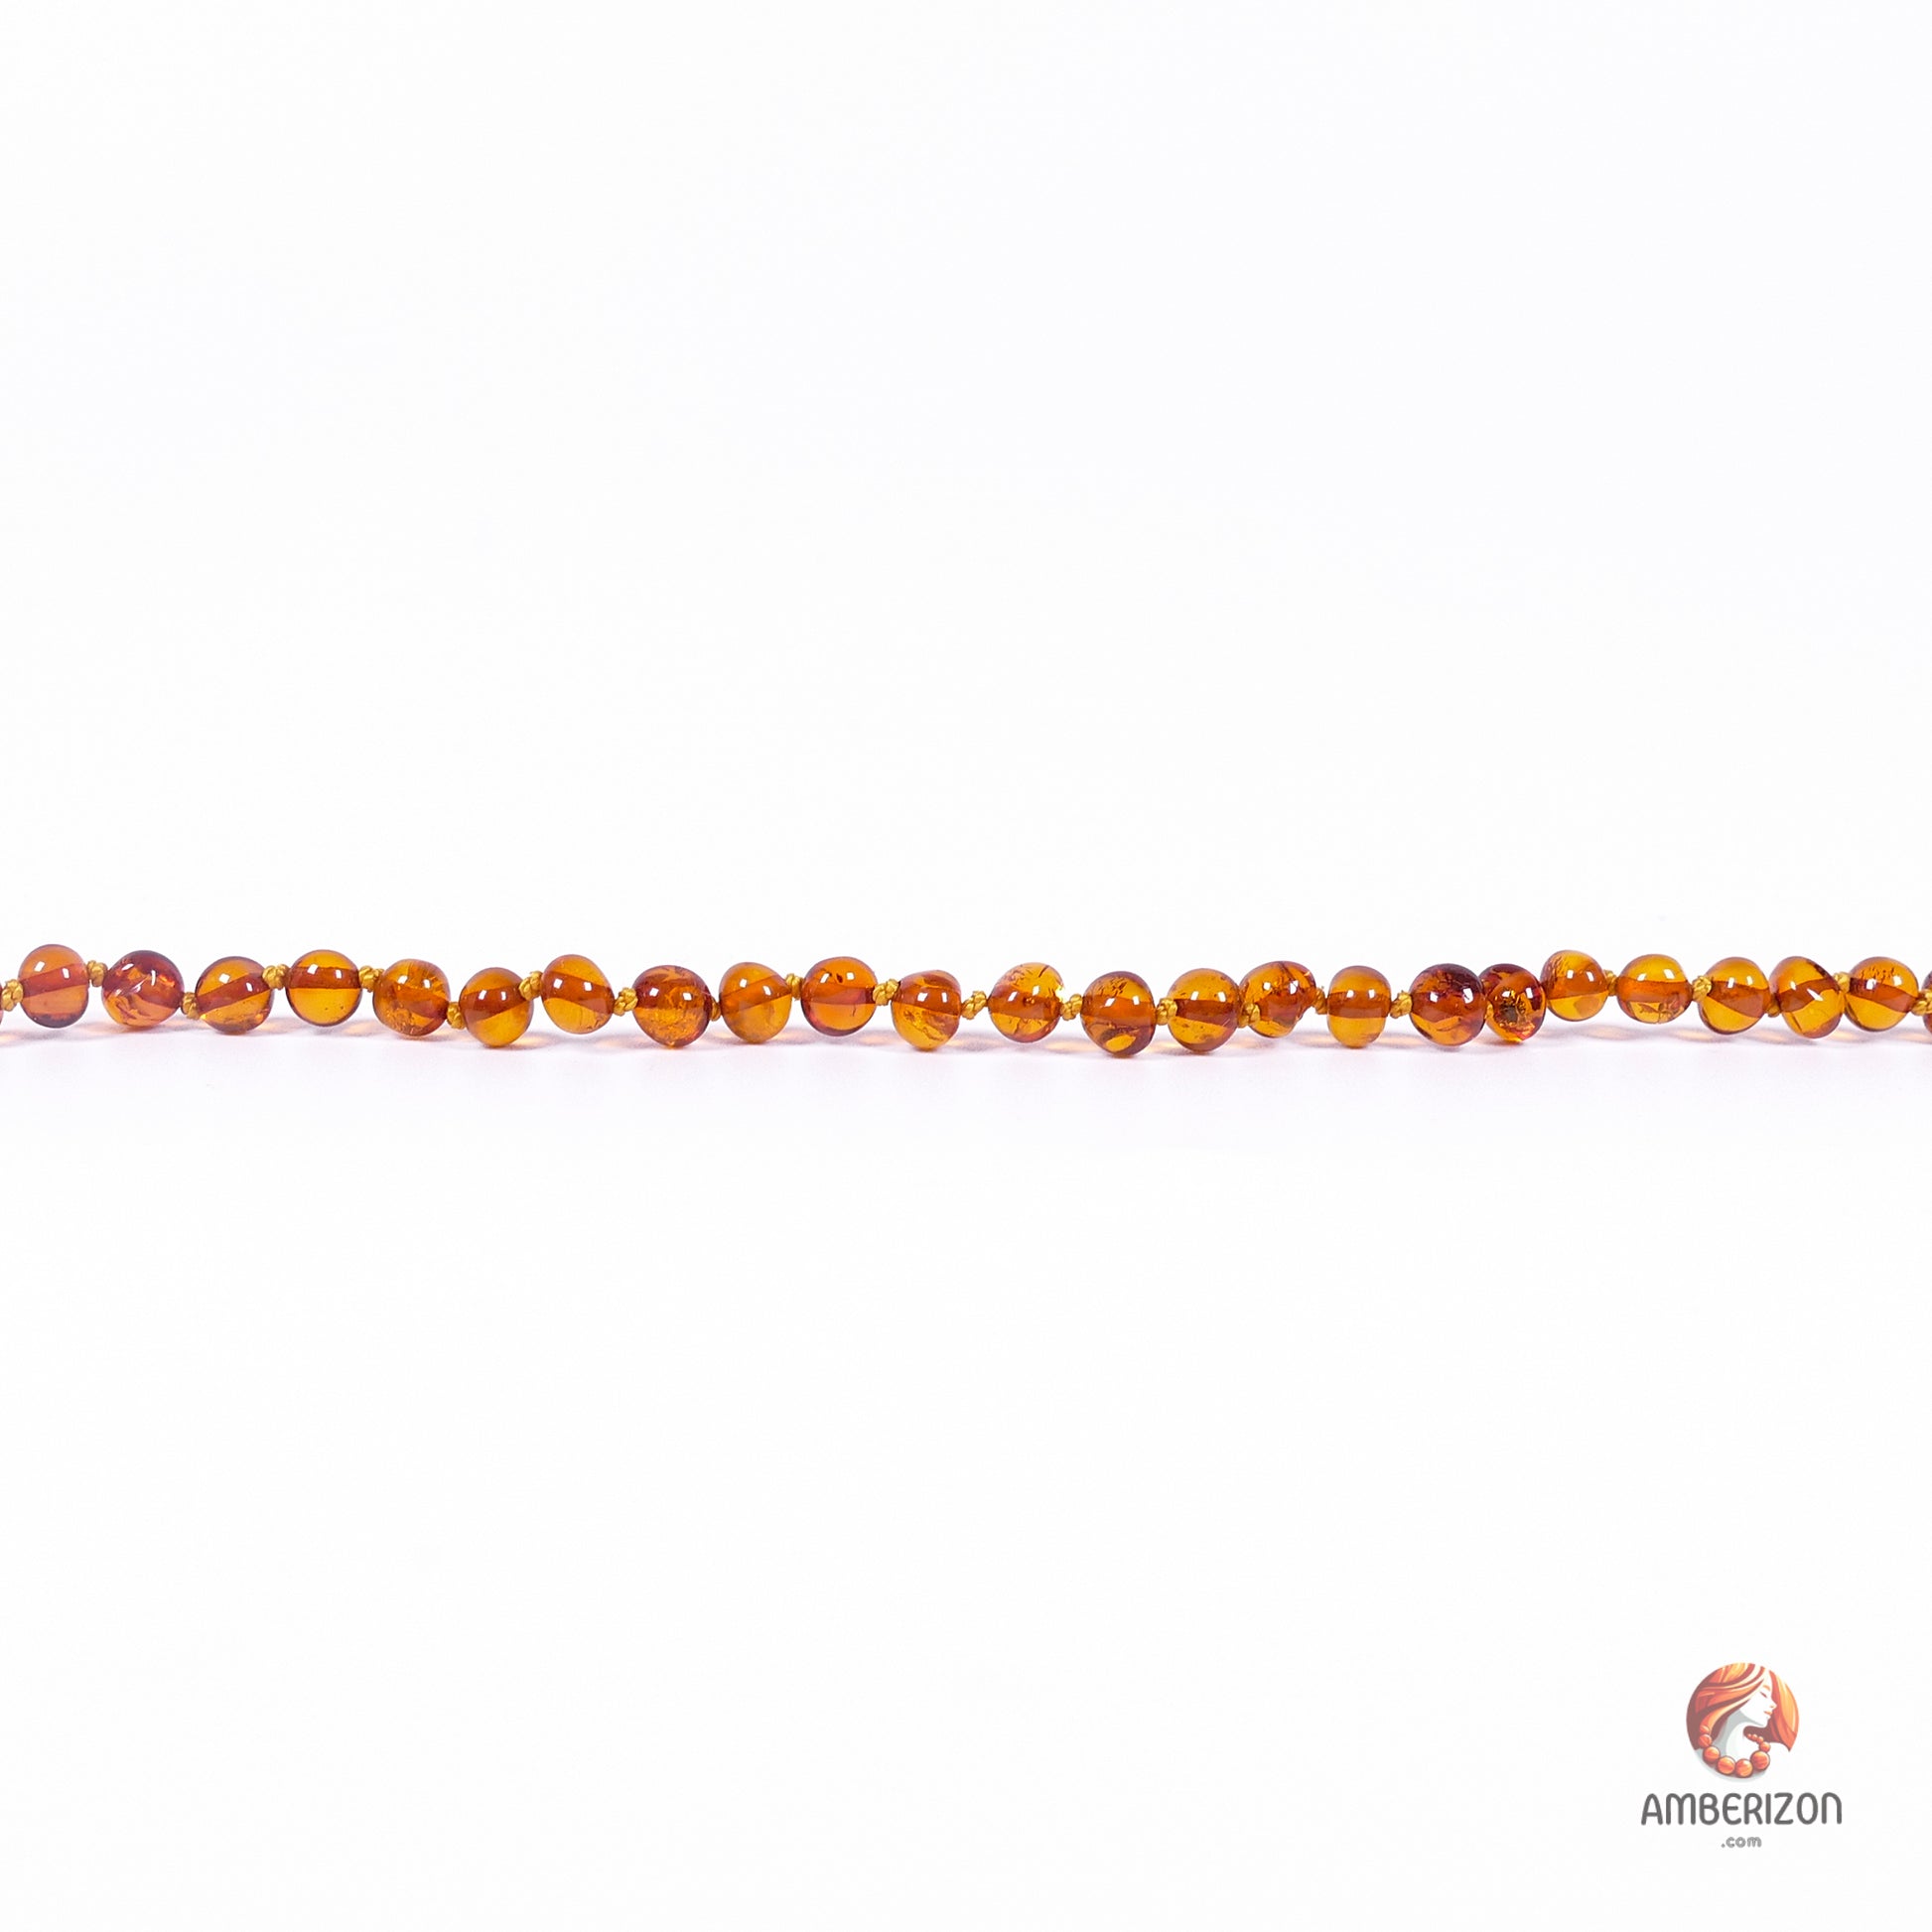 Certified Adult Baltic Amber Necklace - Classic Baroque Beads